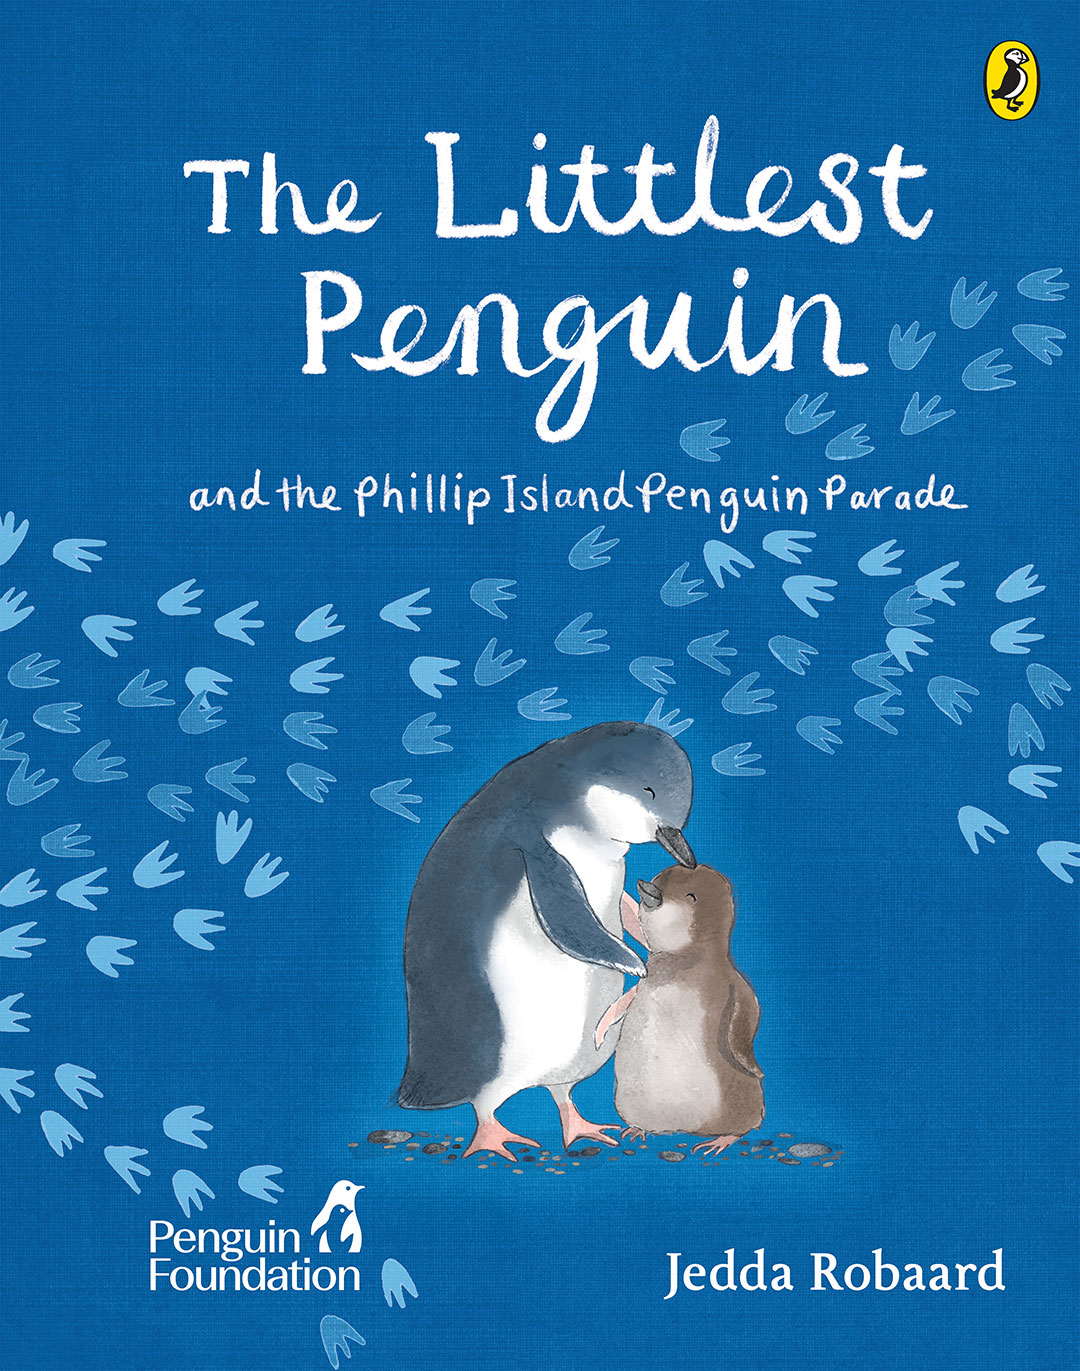 the Littlest Penguin and the Phillip Island Penguin Paradeby Jedda Robaard in Partnership With the Penguin Foundation